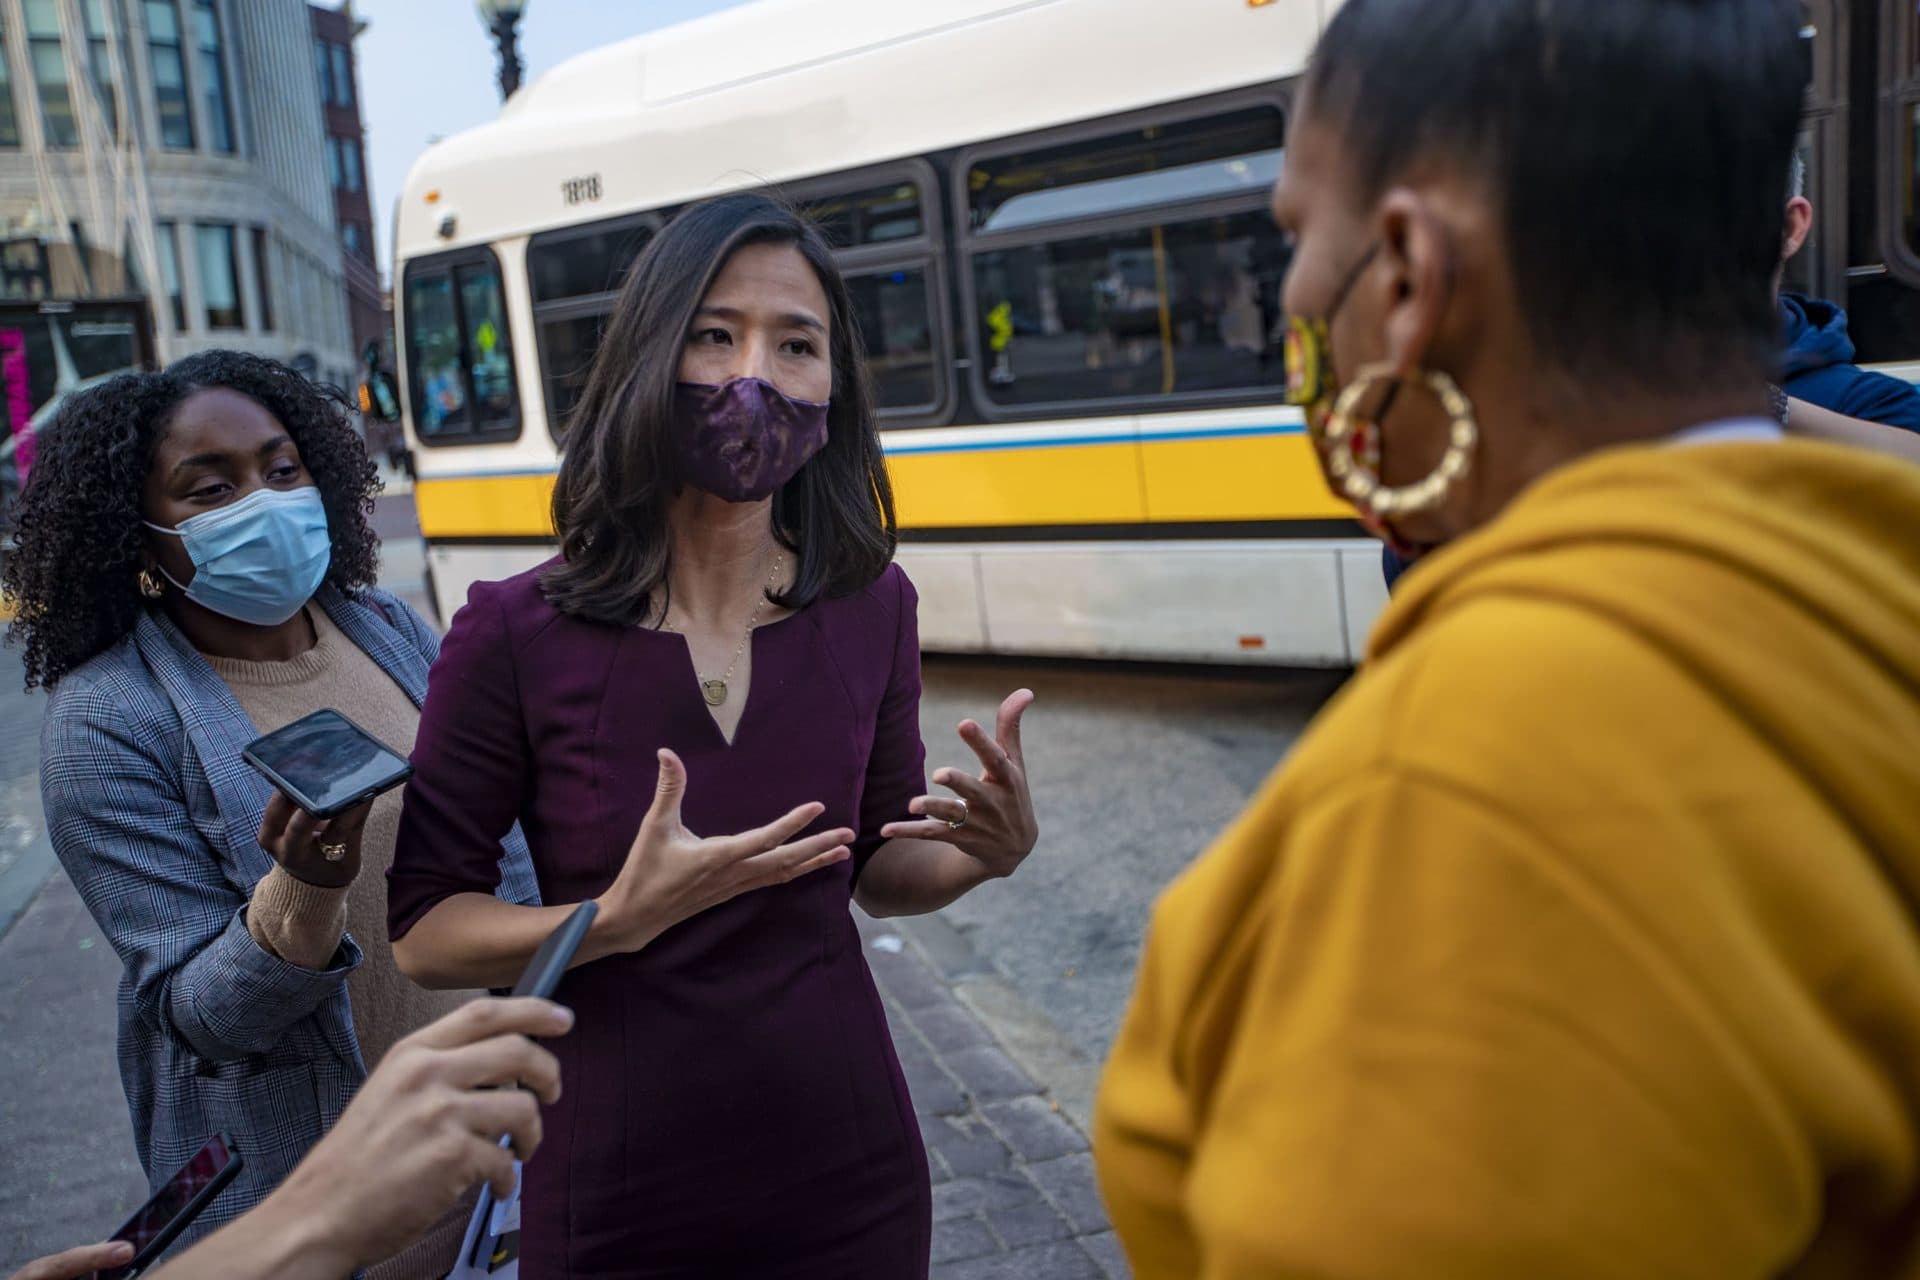 Mayoral candidate Michelle Wu speaks with a Roxbury resident during a campaign appearance outside of Nubian Station on Sept. 15, 2020. (Jesse Costa/WBUR)